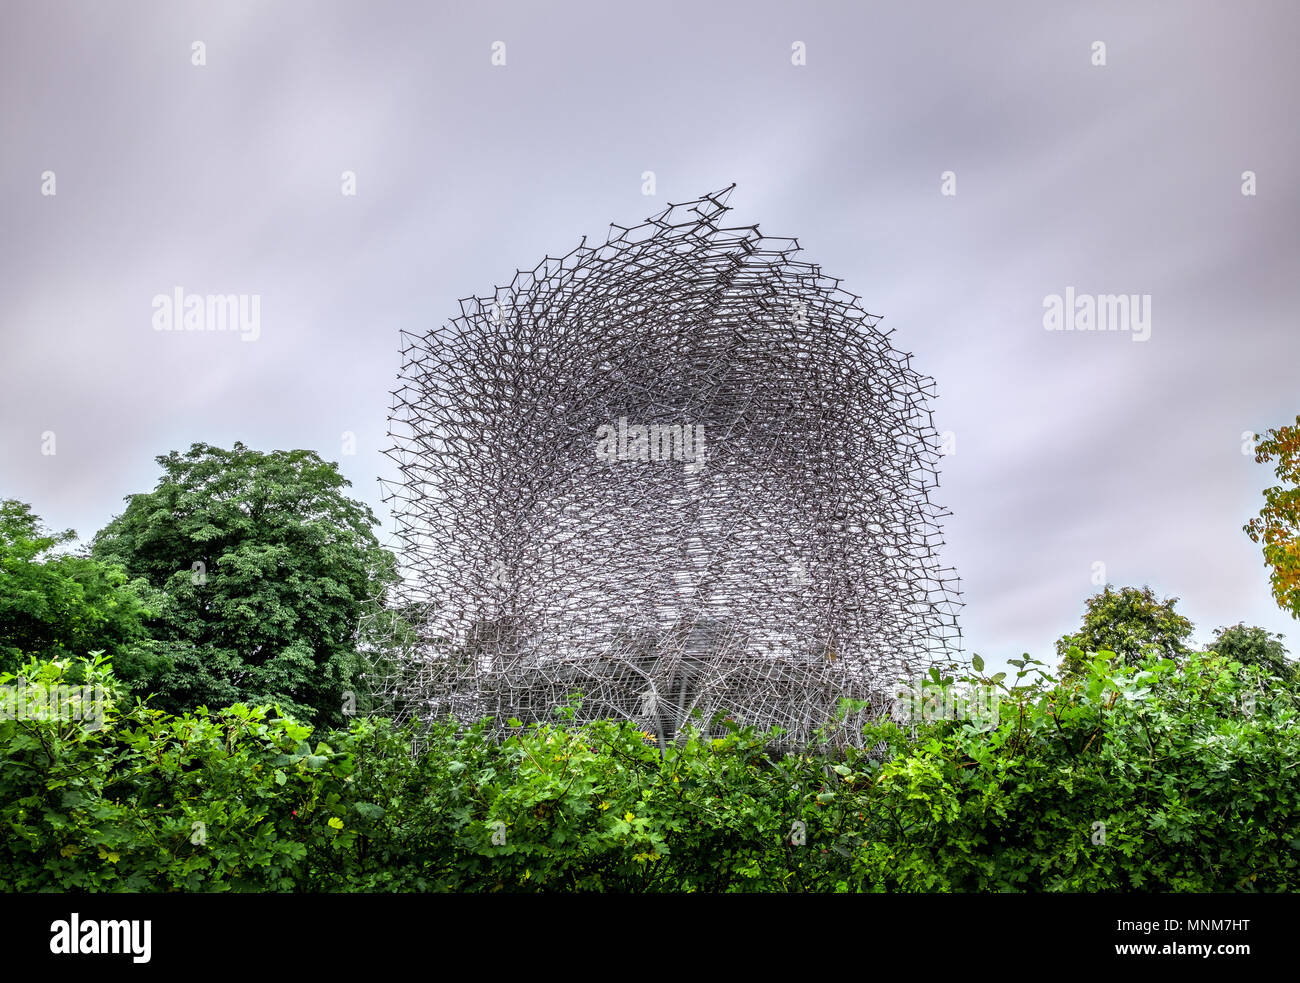 I really like the hive blends with the nature and from this angle you don't see signs of human civilization Stock Photo - Alamy